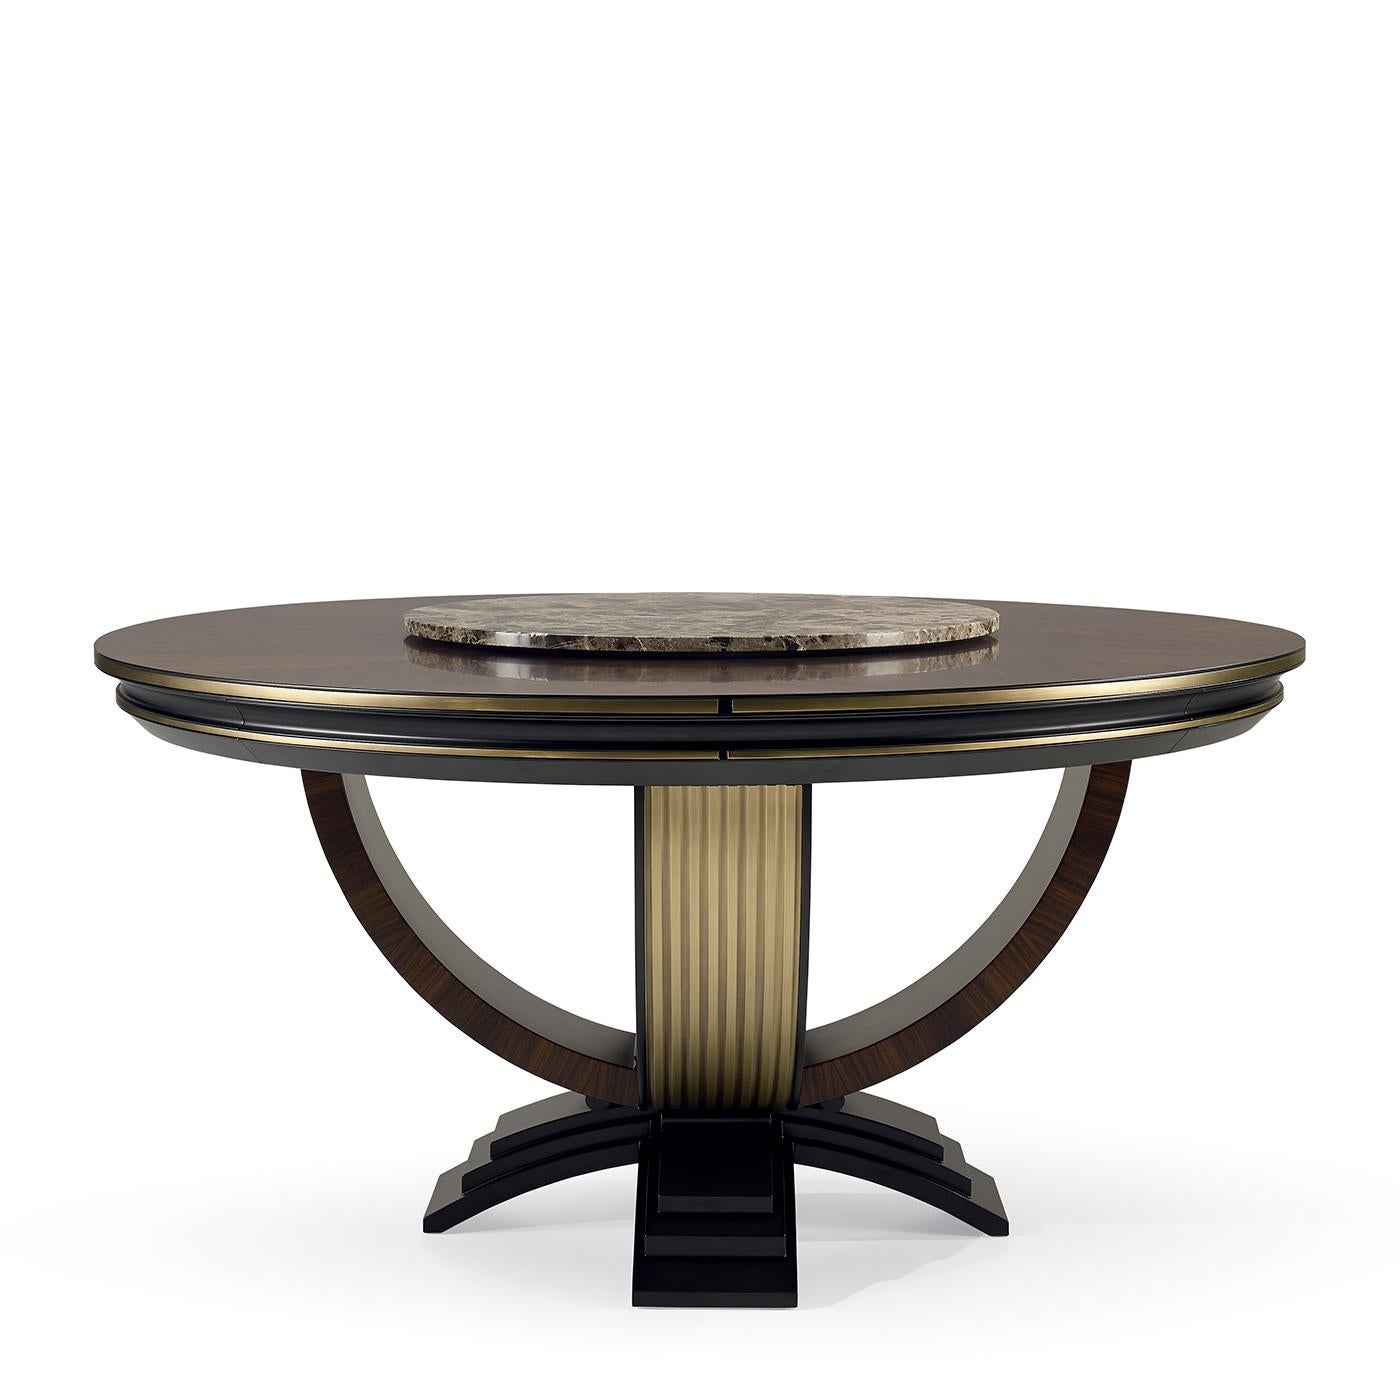 The splendid unique silhouette of this round dining table will make a statement in any Classic decor, infusing it with plush sophistication and charming allure. A combination of refined materials, it is handcrafted of plywood and India